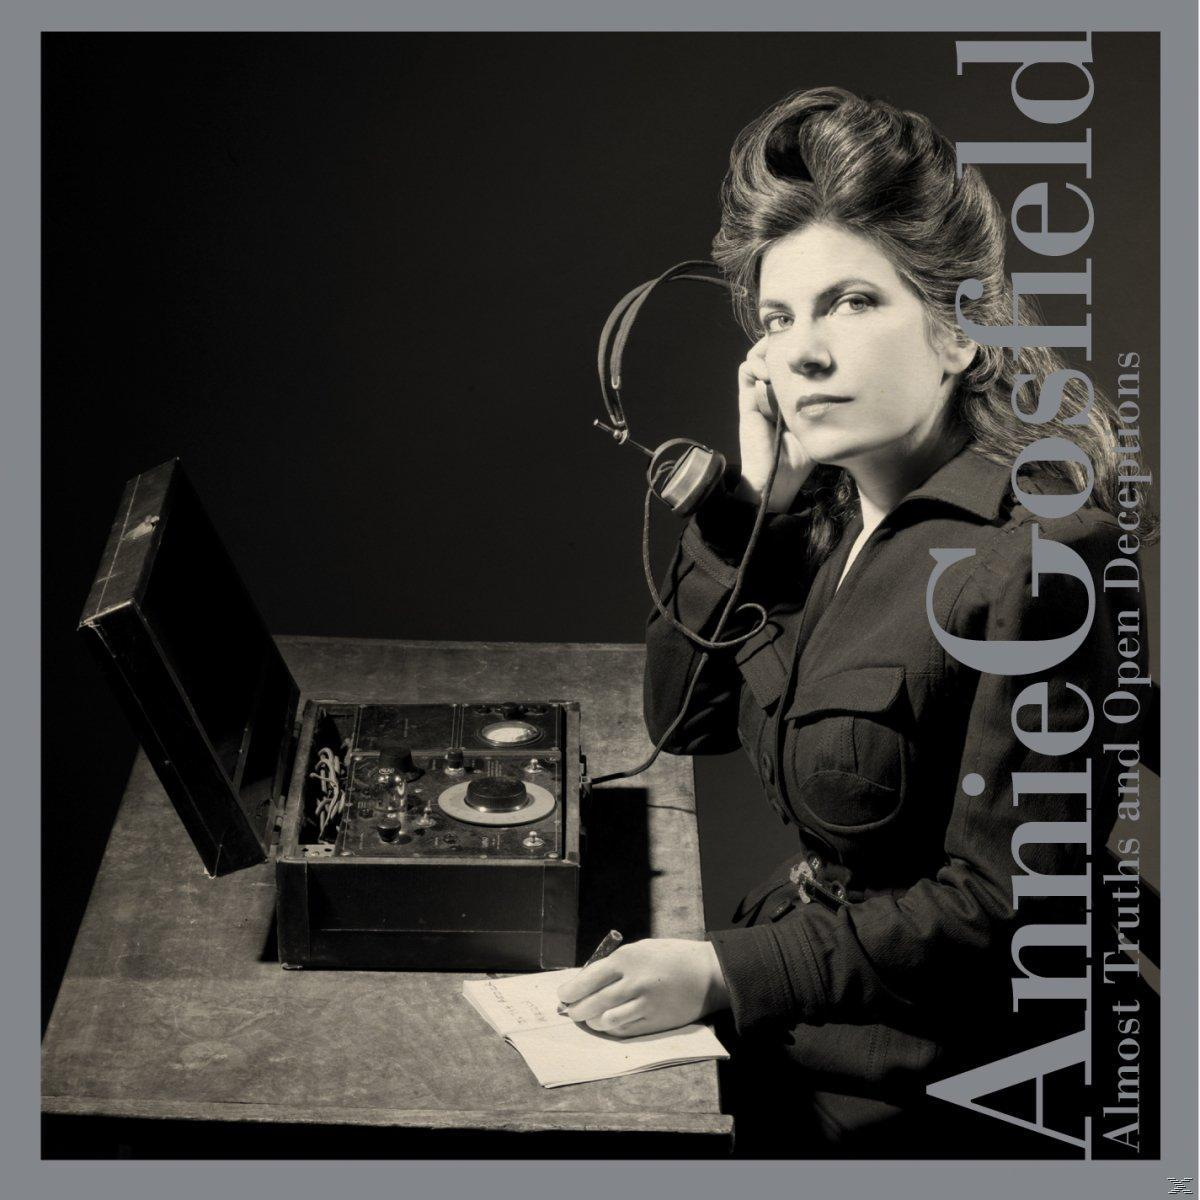 Annie (CD) And Gosfield - Almost Open Truths - Deceptions